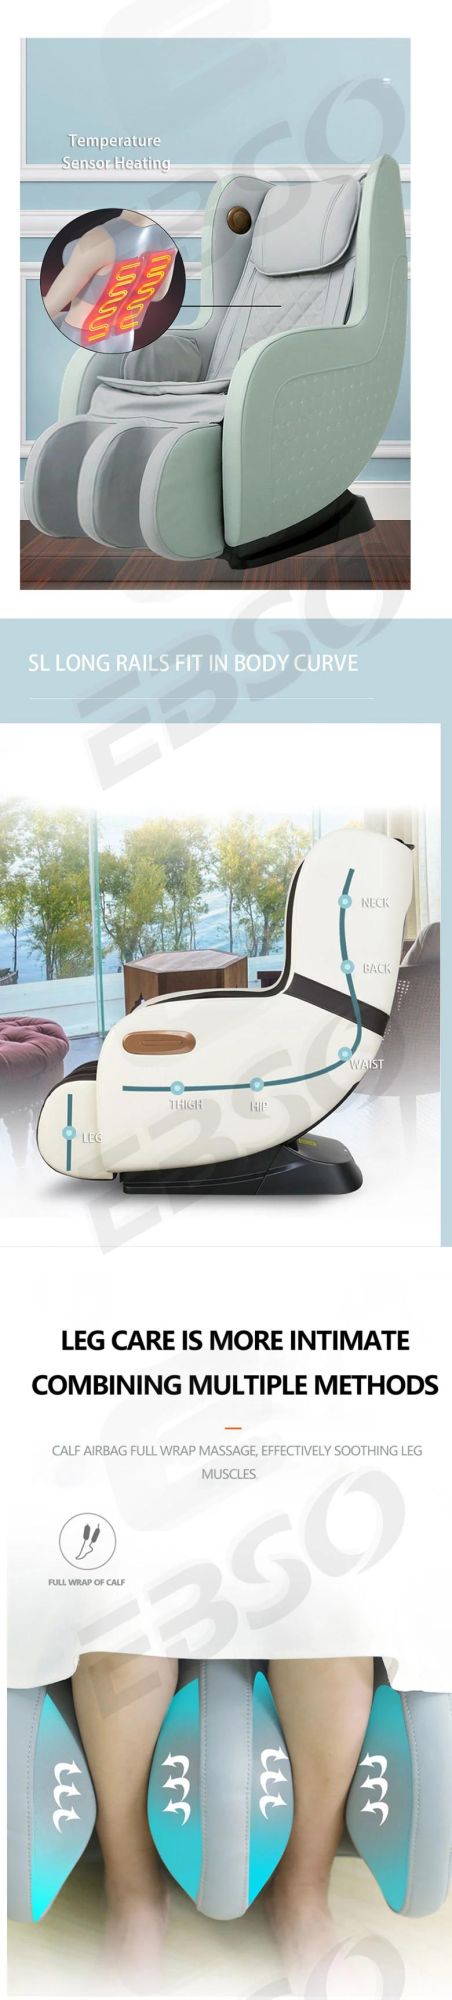 Luxury Massage Chair Full Body Modern Design with USB Charging